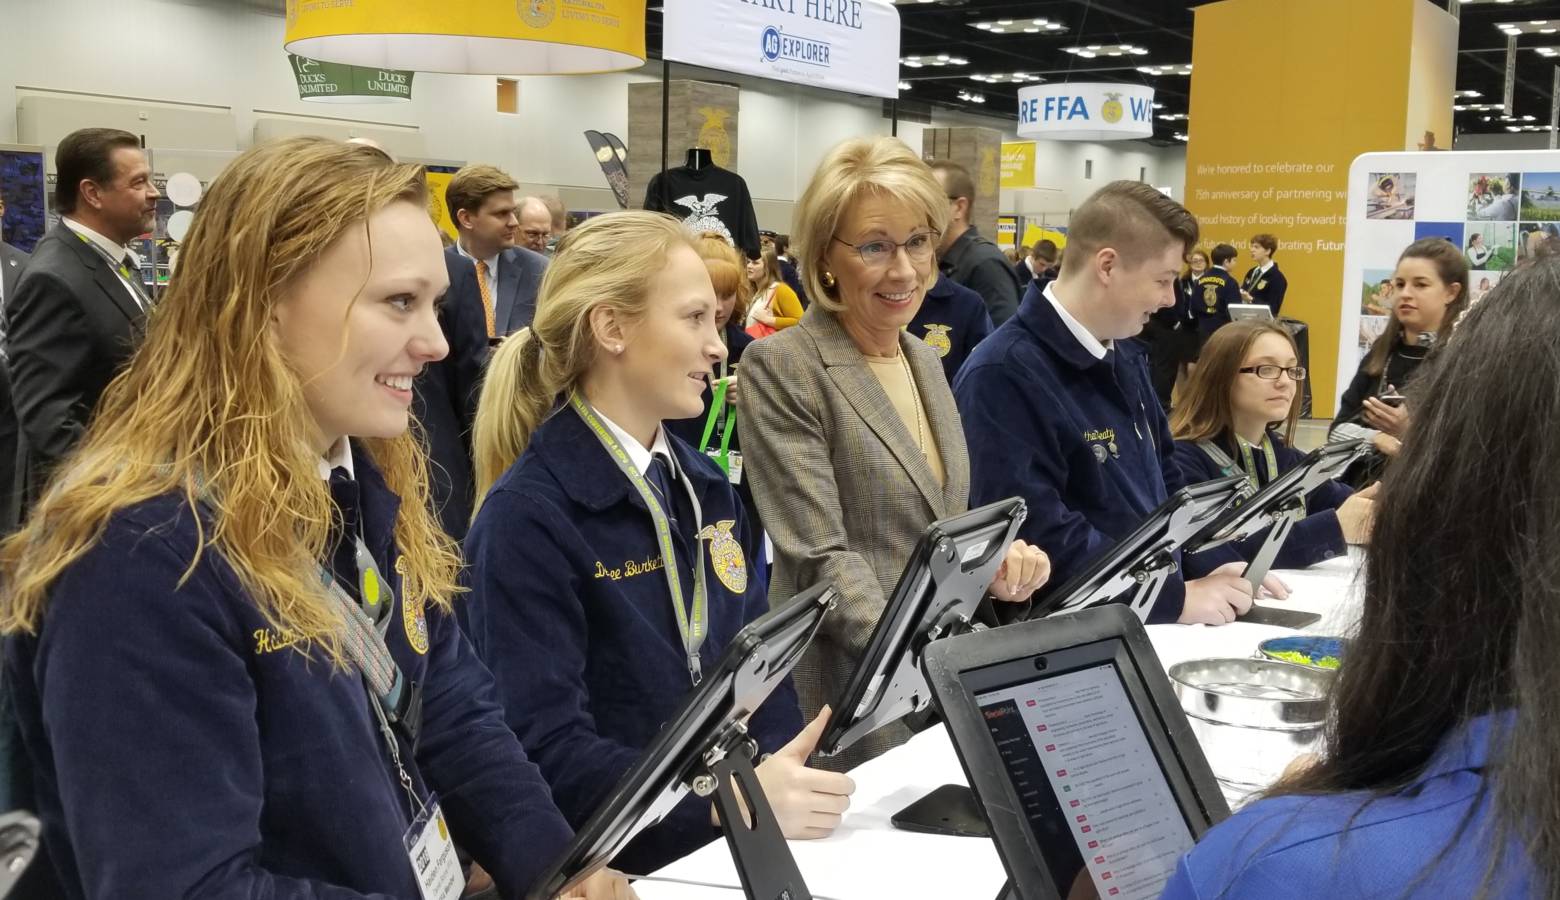 US Secretary of Education Betsy DeVos met with FFA students at this week’s national convention, to support career exploration in agriculture. (Jeanie Lindsay/IPB News)